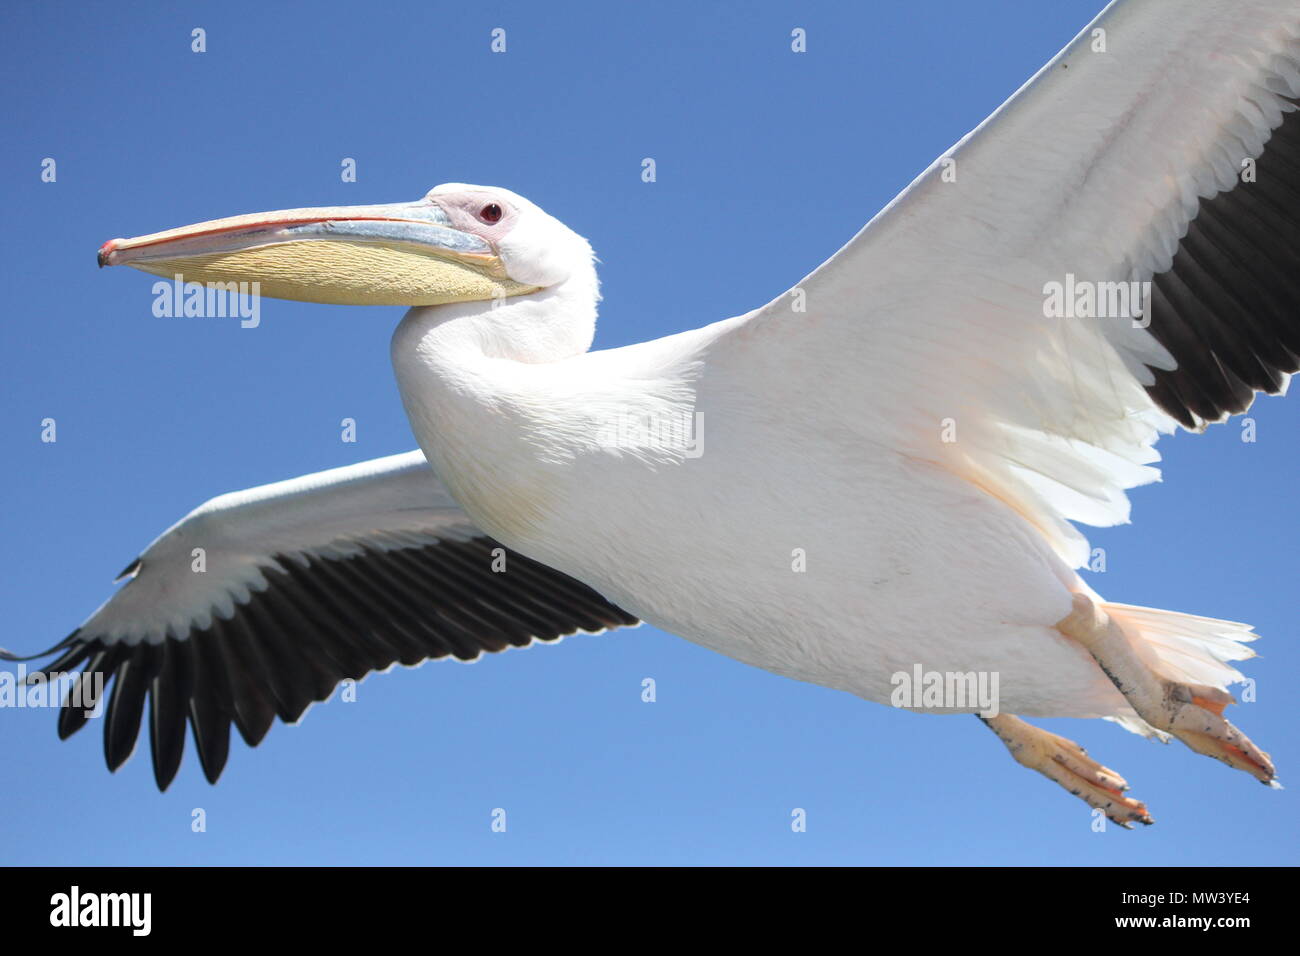 Close up of one pelican flying Stock Photo